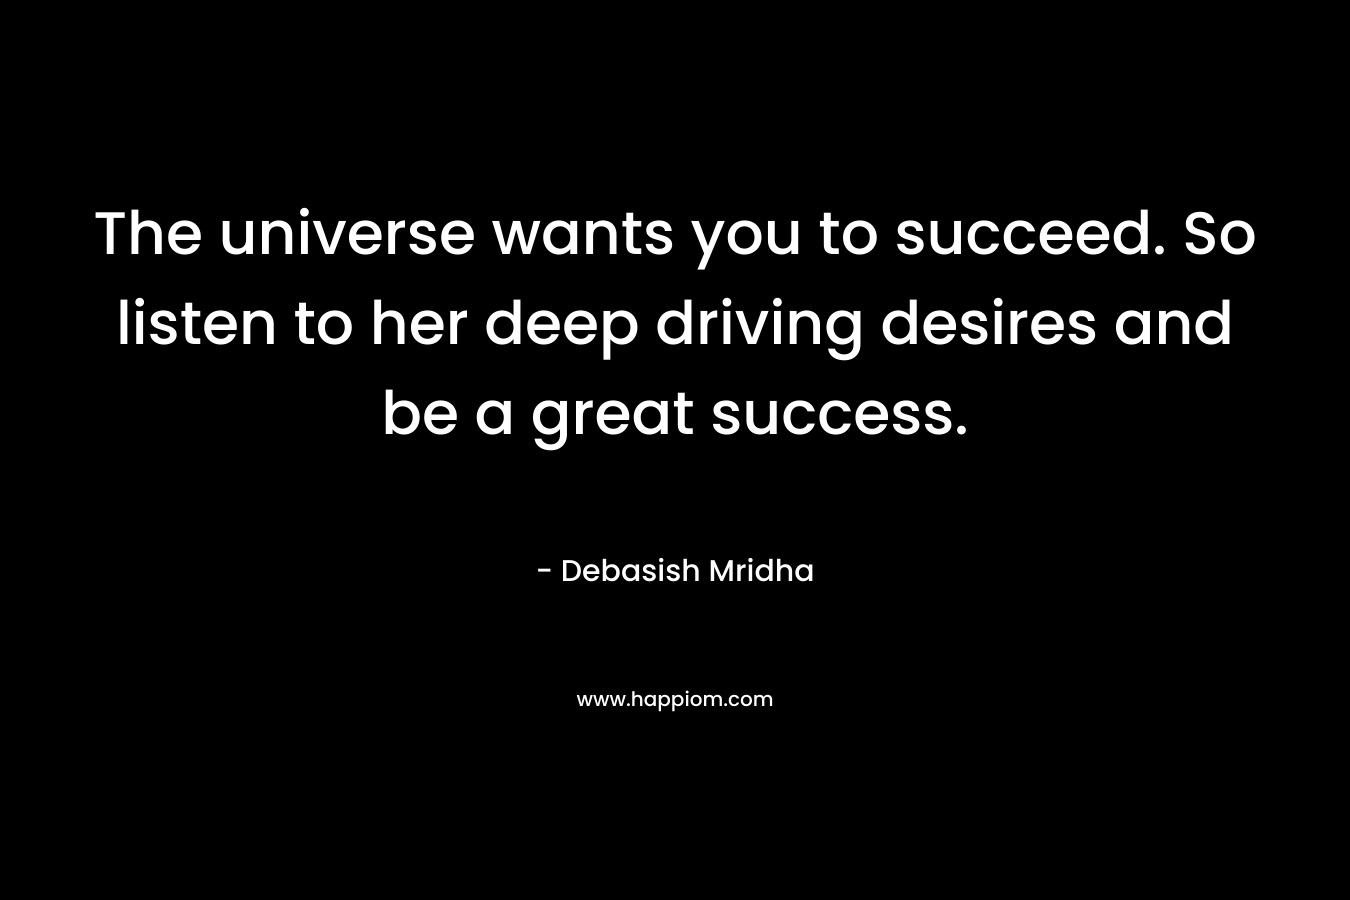 The universe wants you to succeed. So listen to her deep driving desires and be a great success.